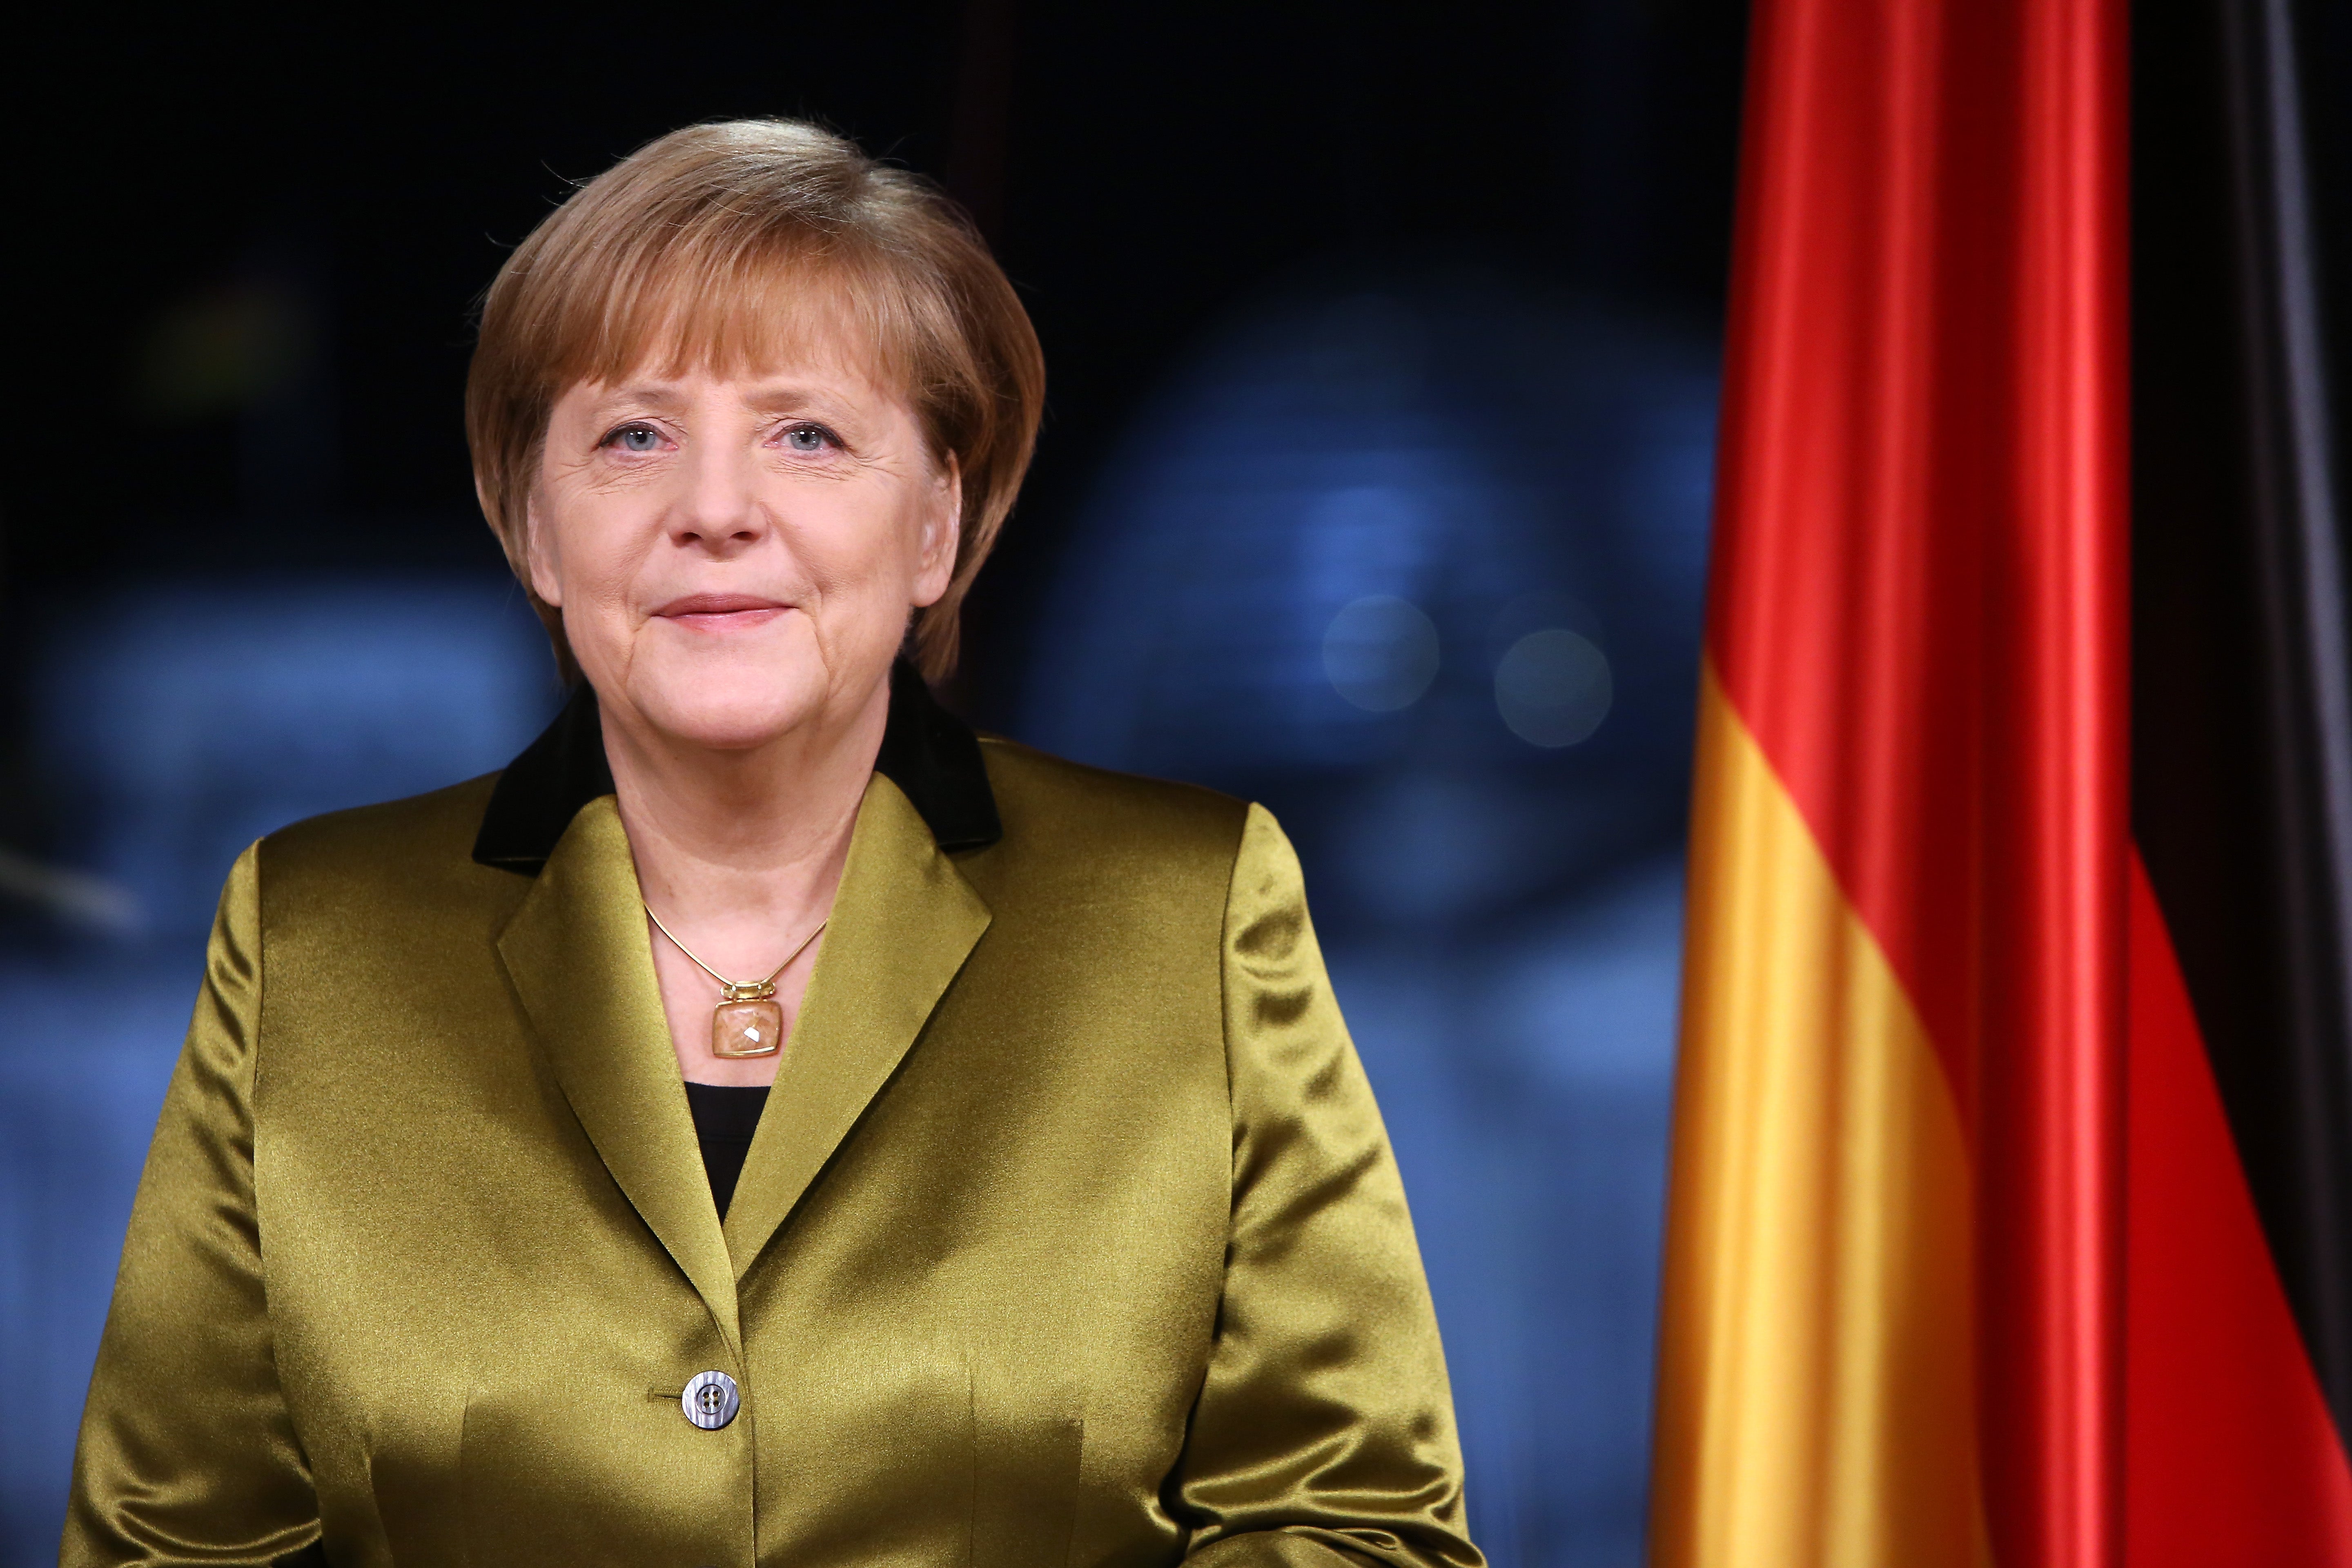 After 16 years in office, Merkel is the world’s most successful democratic politician